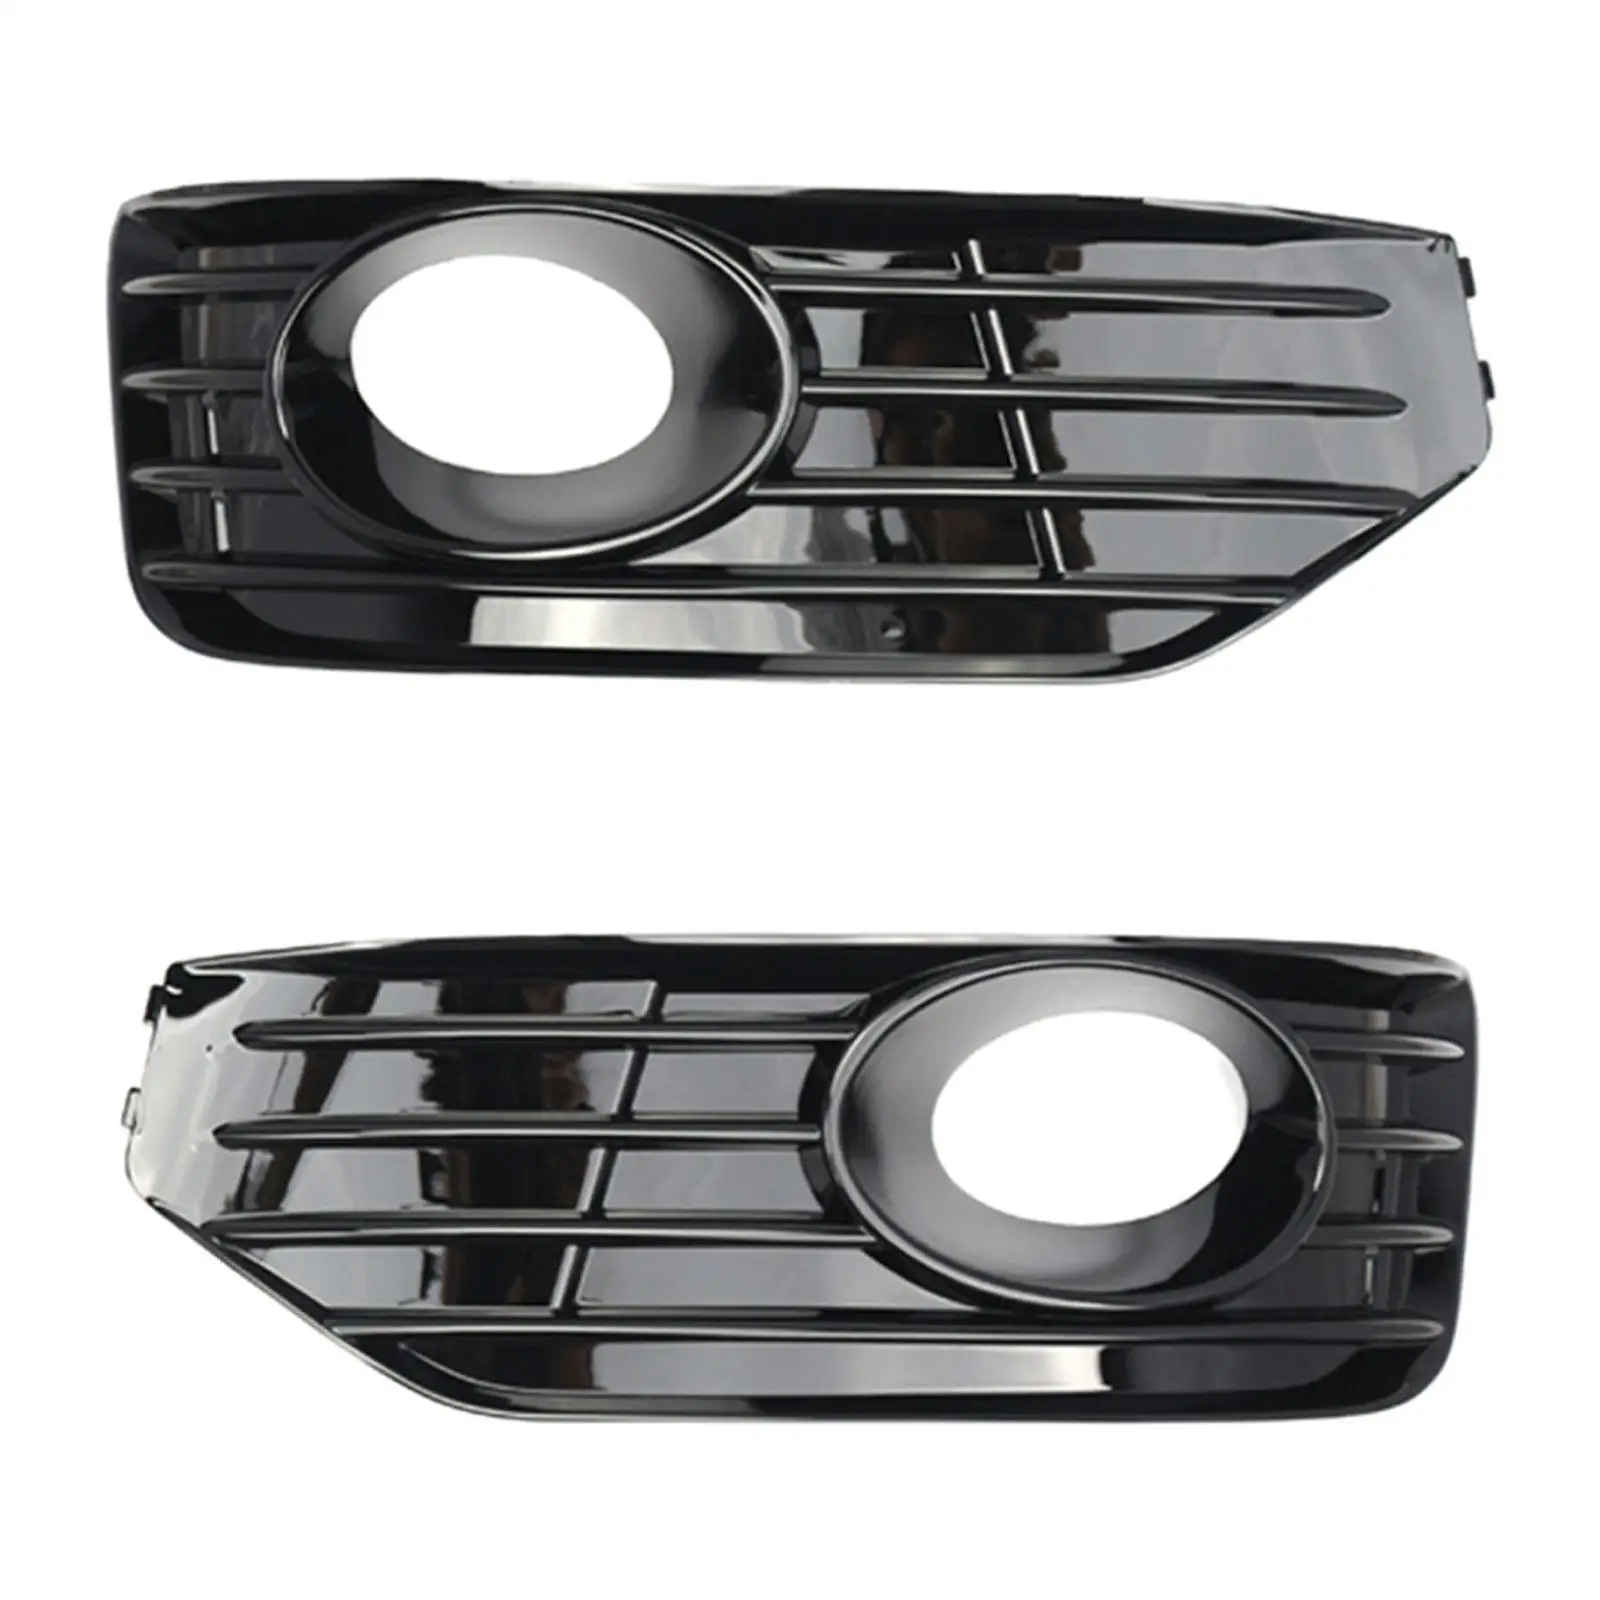 2x Fog Light Grille Covers Easy to Install Accessories Wear Resistant Fog Lamp Cover Insert for VW T5.1 Sportline 2010-2015